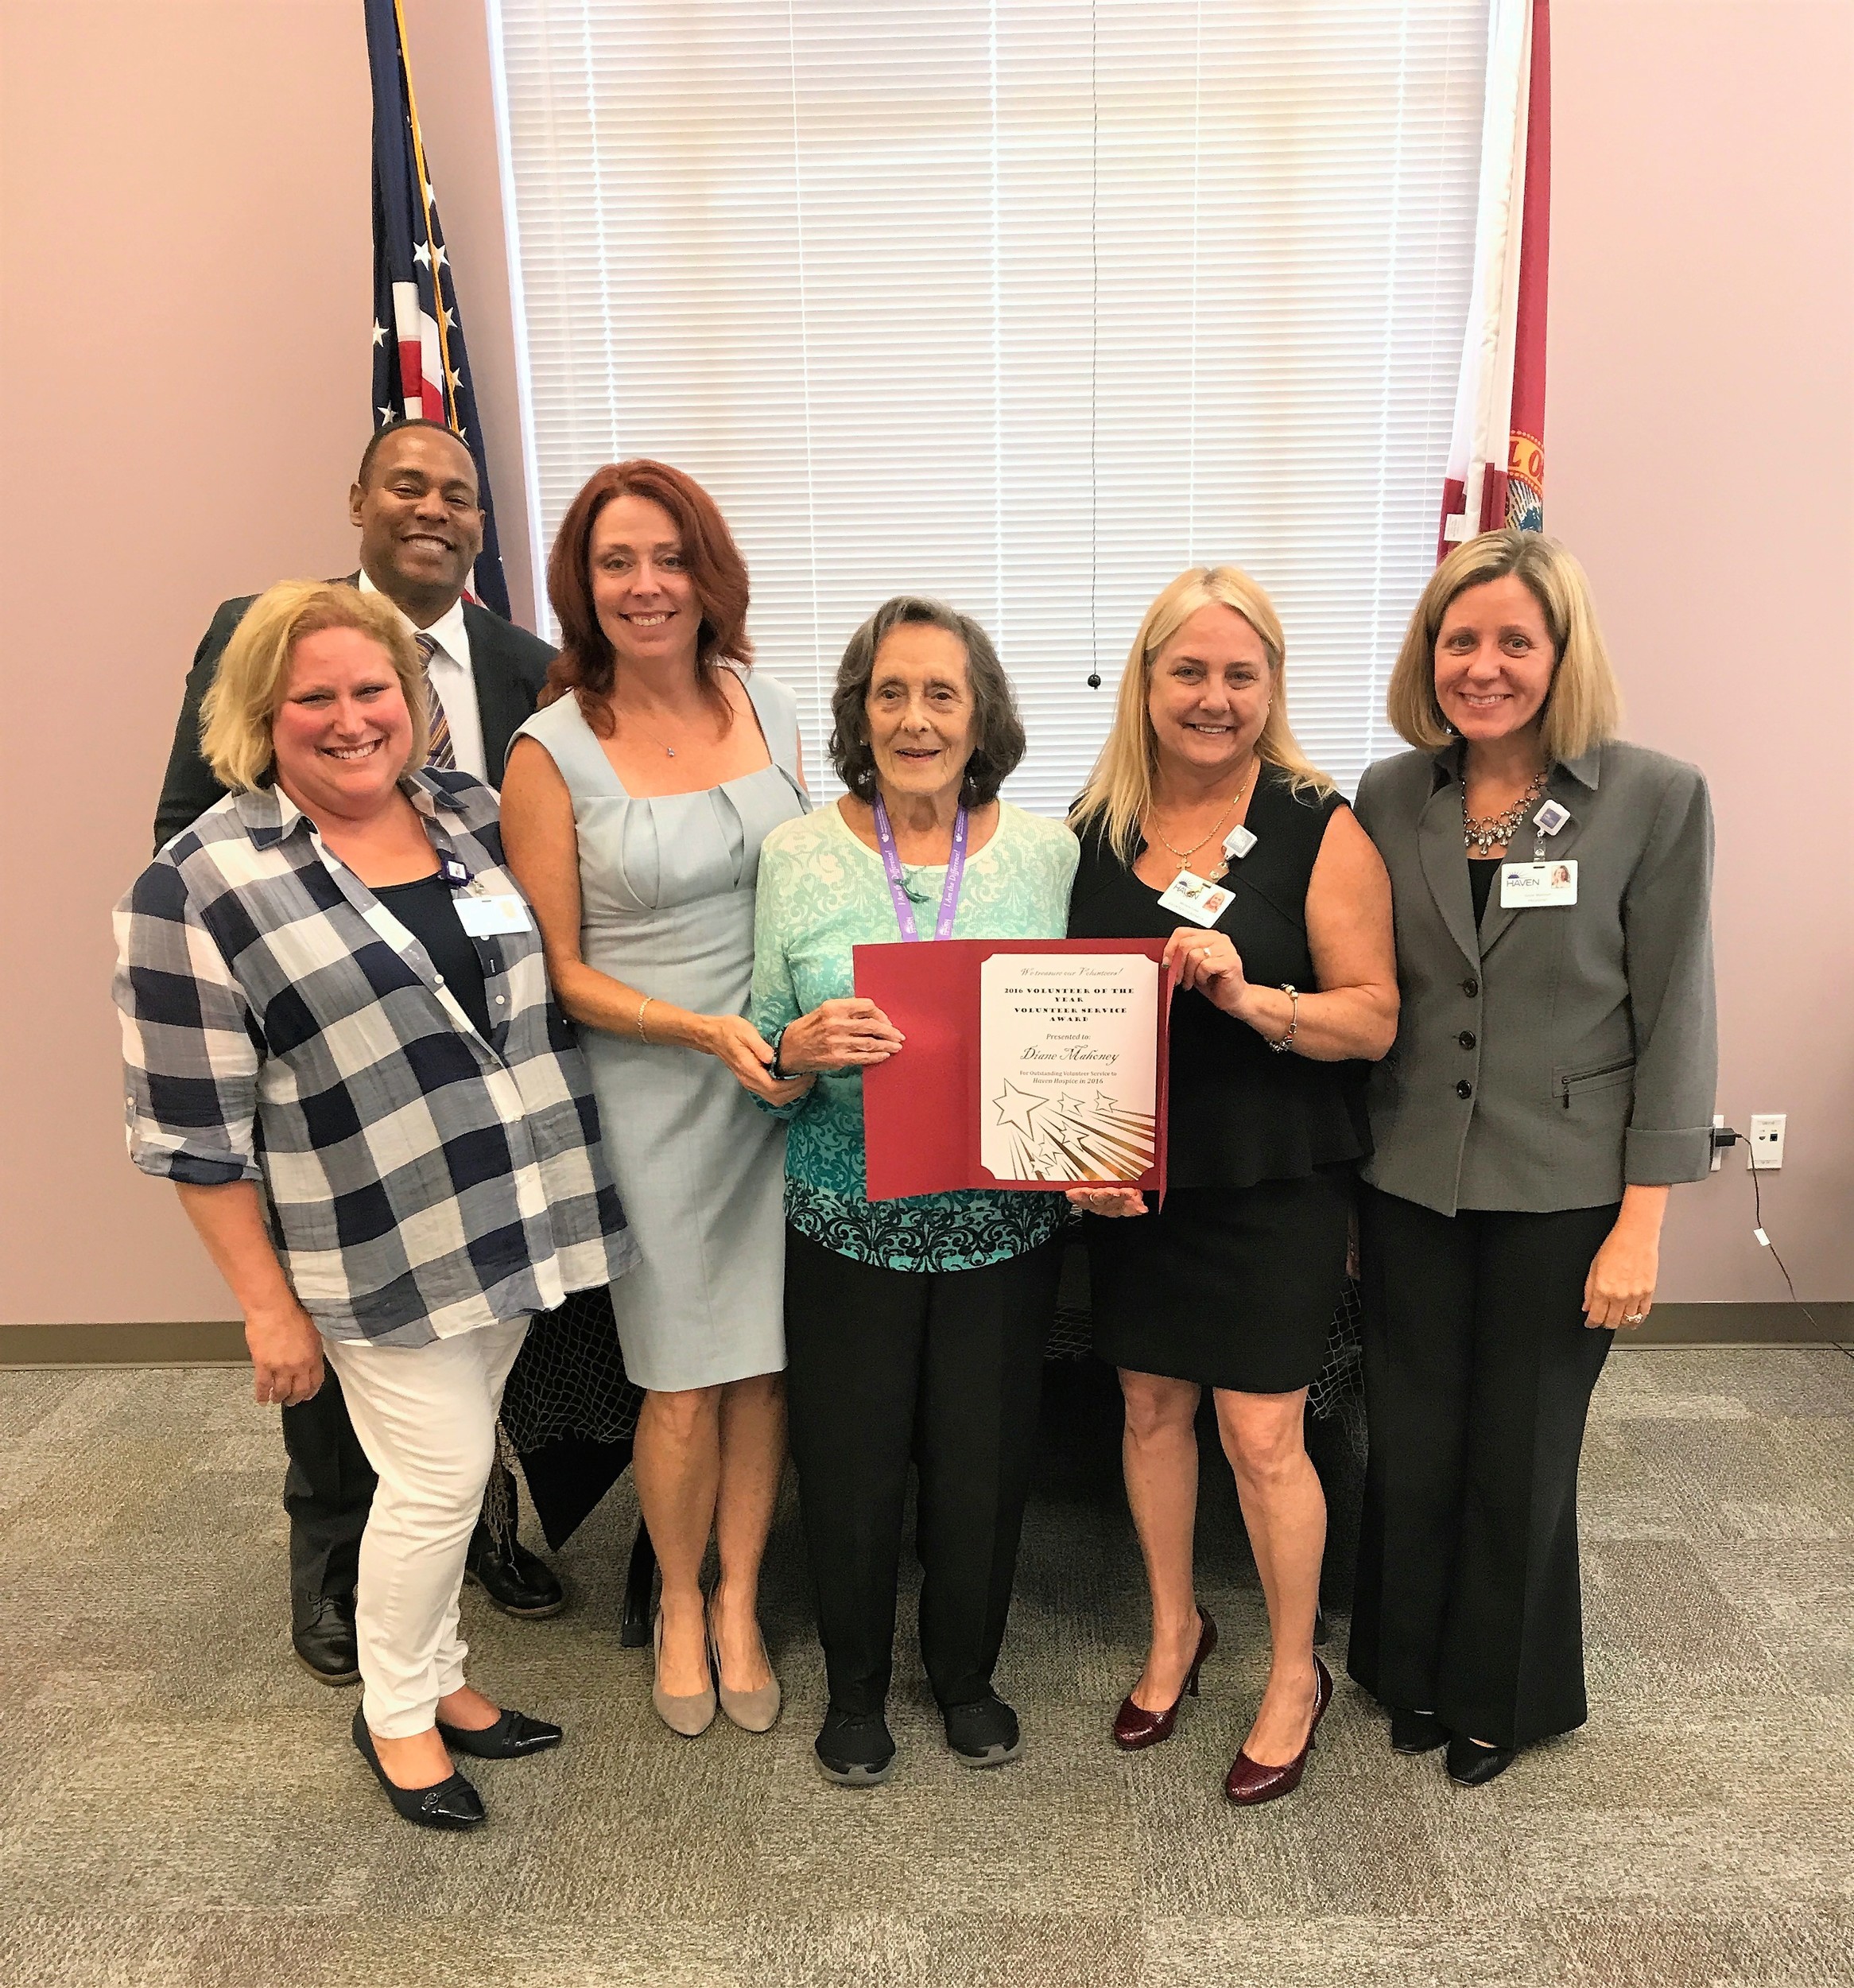 Haven Hospice Director of Volunteer Services
Courtney Quirie, Vice President of Organizational
Advancement Eric Godet, Administrator Cathy Johnston, Outstanding Volunteer of the Year Diane Mahoney, Volunteer
Coordinator Michelle Colee and President Gayle Mattson.